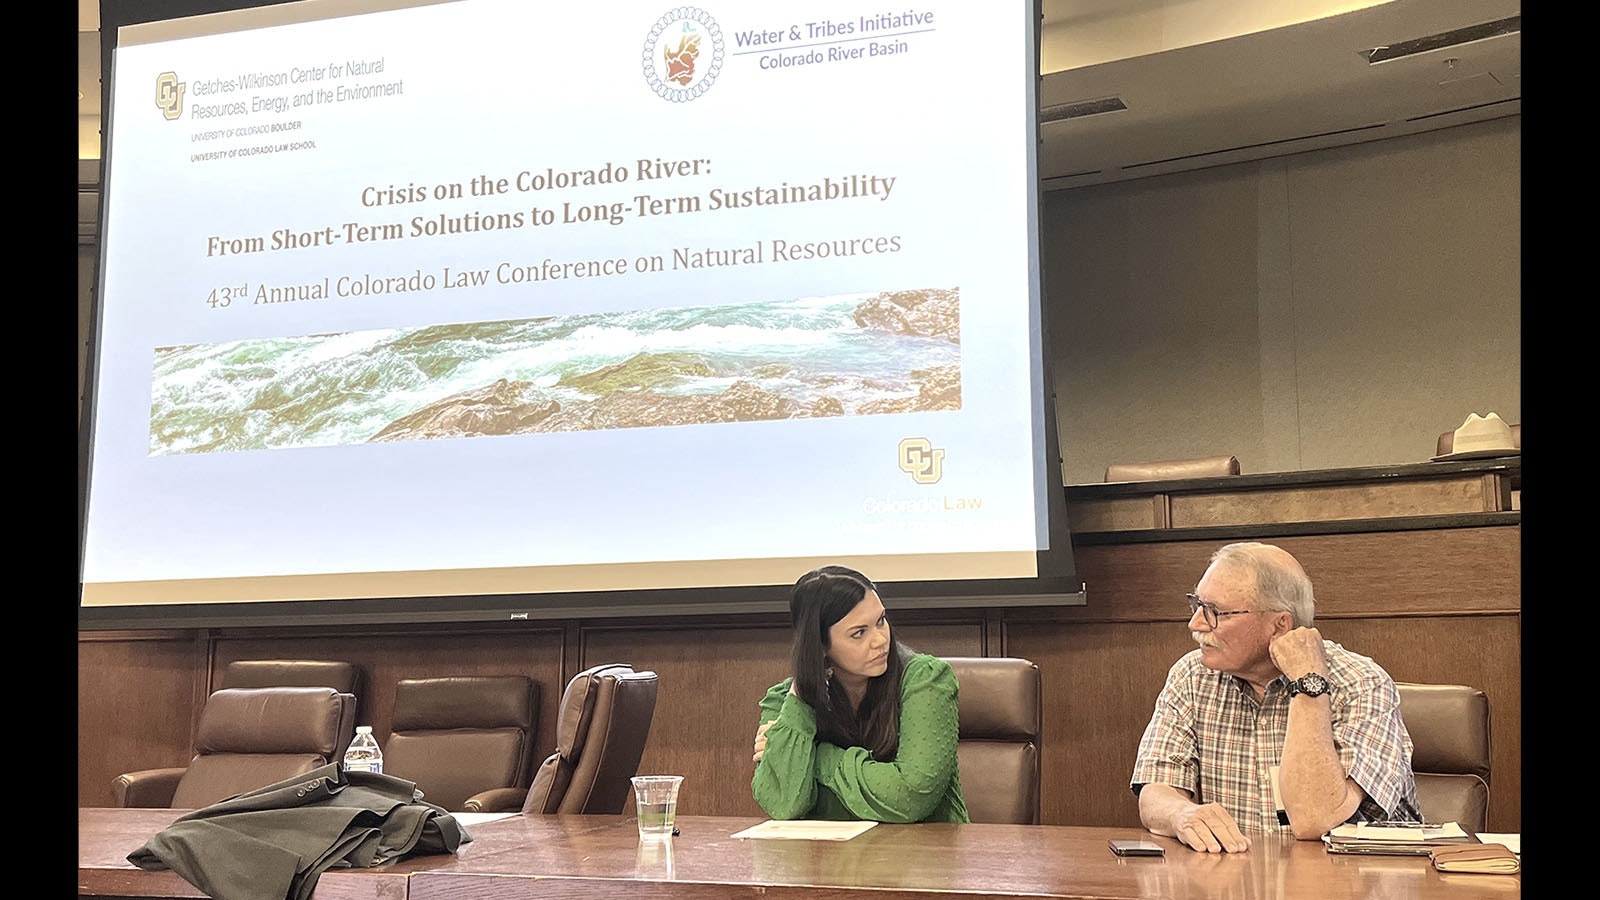 Wyoming rancher and former legislator Pat O’Toole chats with Meghan Scott, an attorney who helps farmers in Yuma, Arizona, during the “Crisis on the Colorado River conference Friday in Boulder, Colorado.